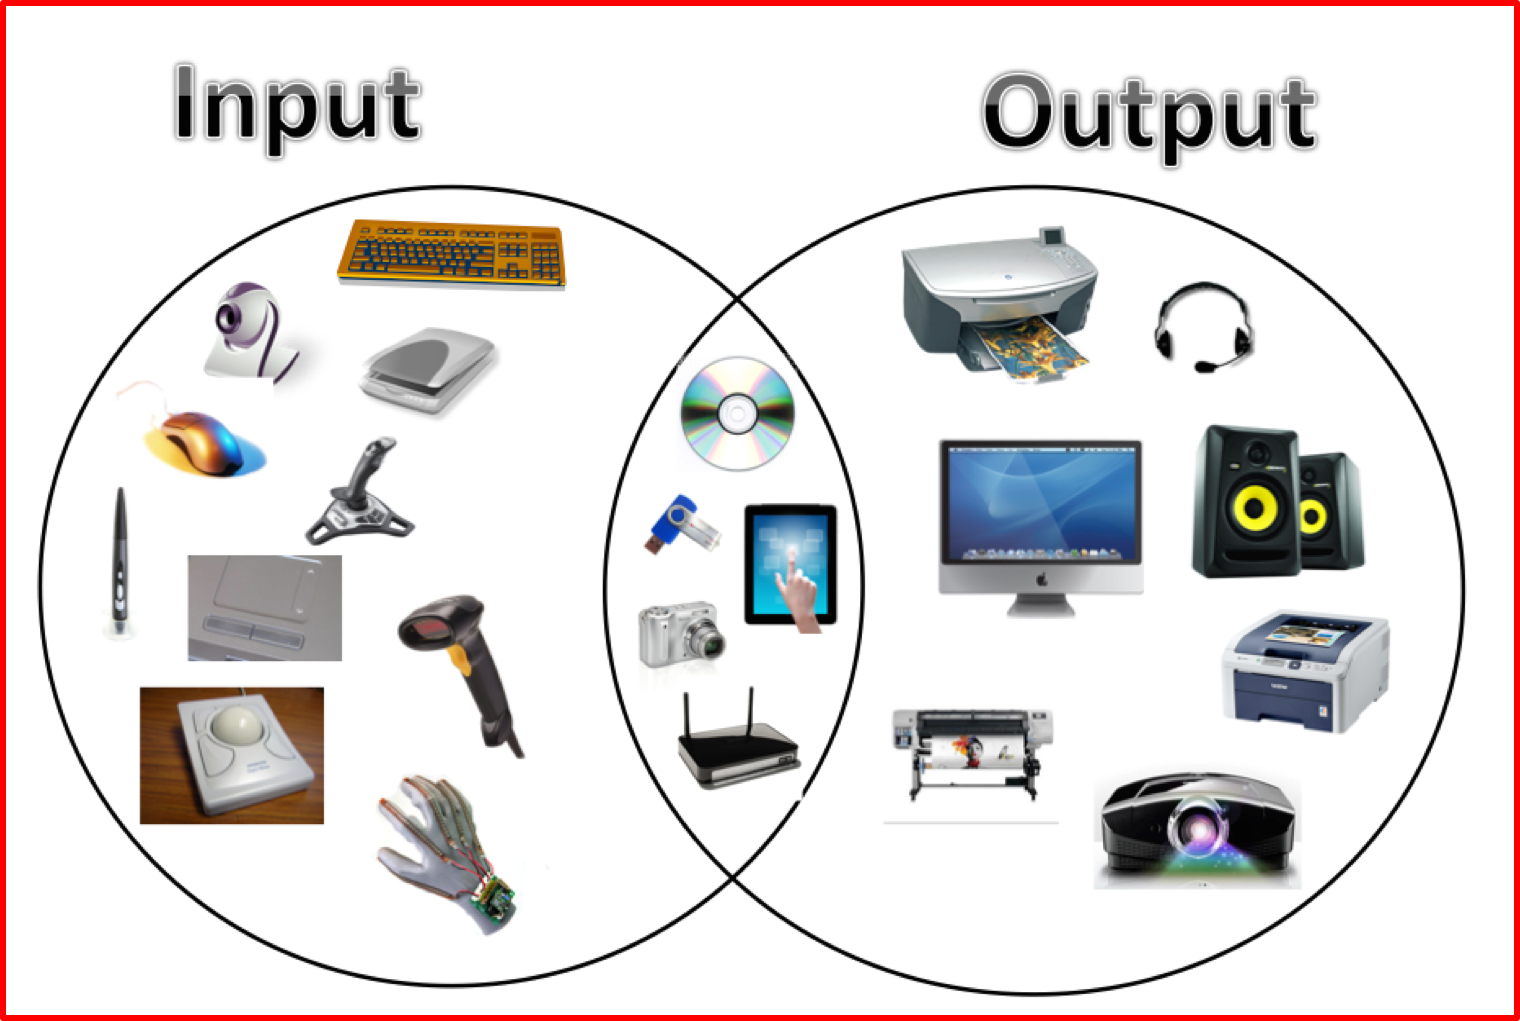 Input output. Input and output devices. Input and output devices of Computer. Устройства ввода и вывода. Output units